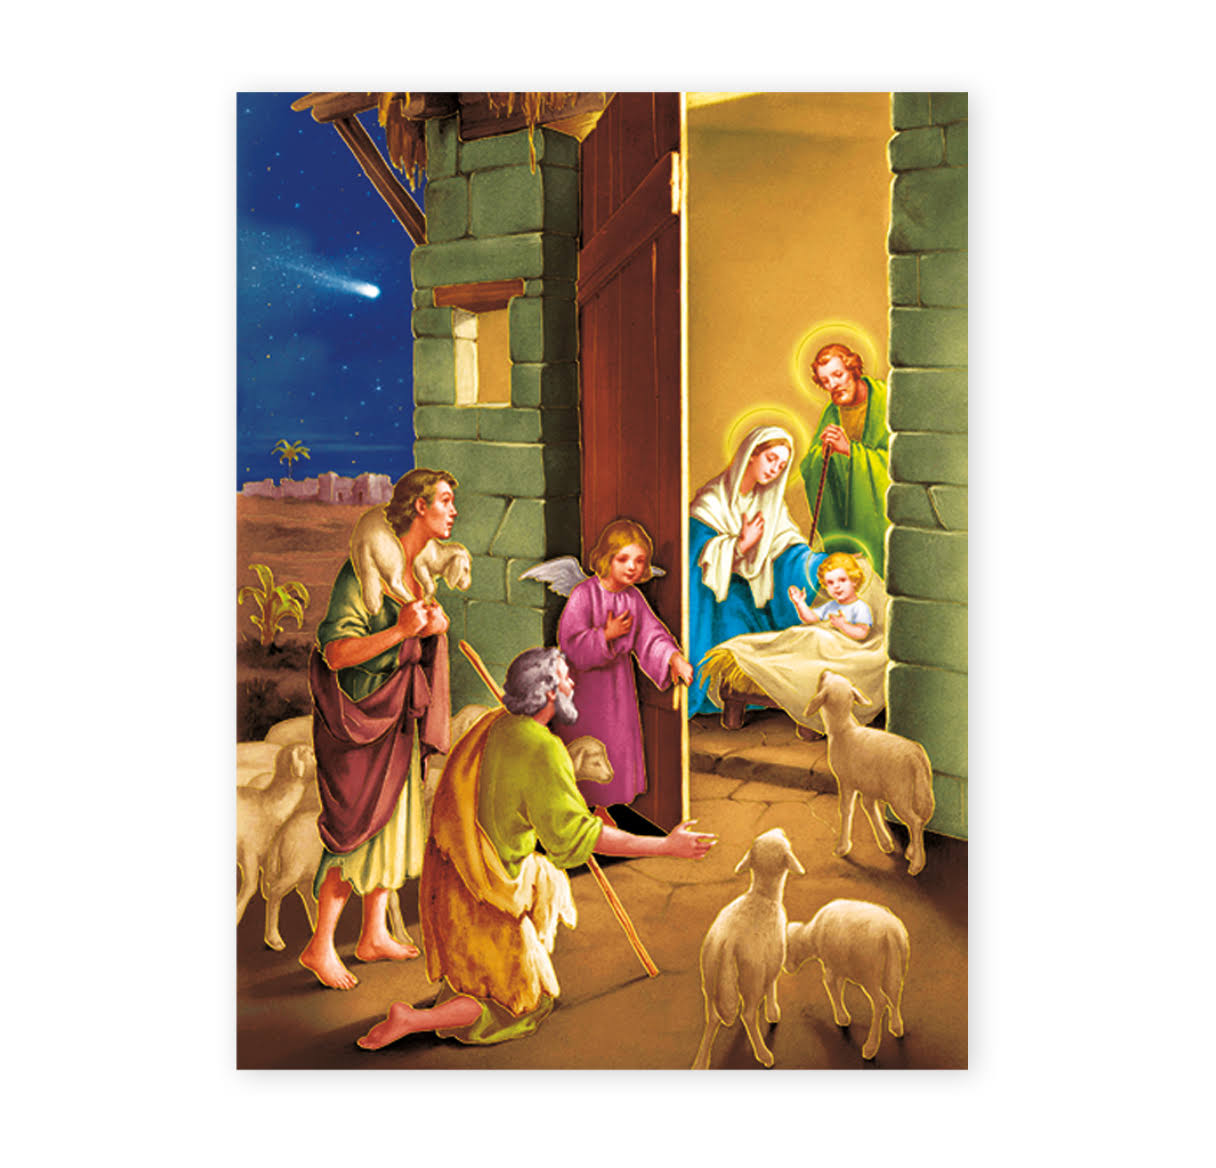 Nativity Large Poster - 19"W x 27"H